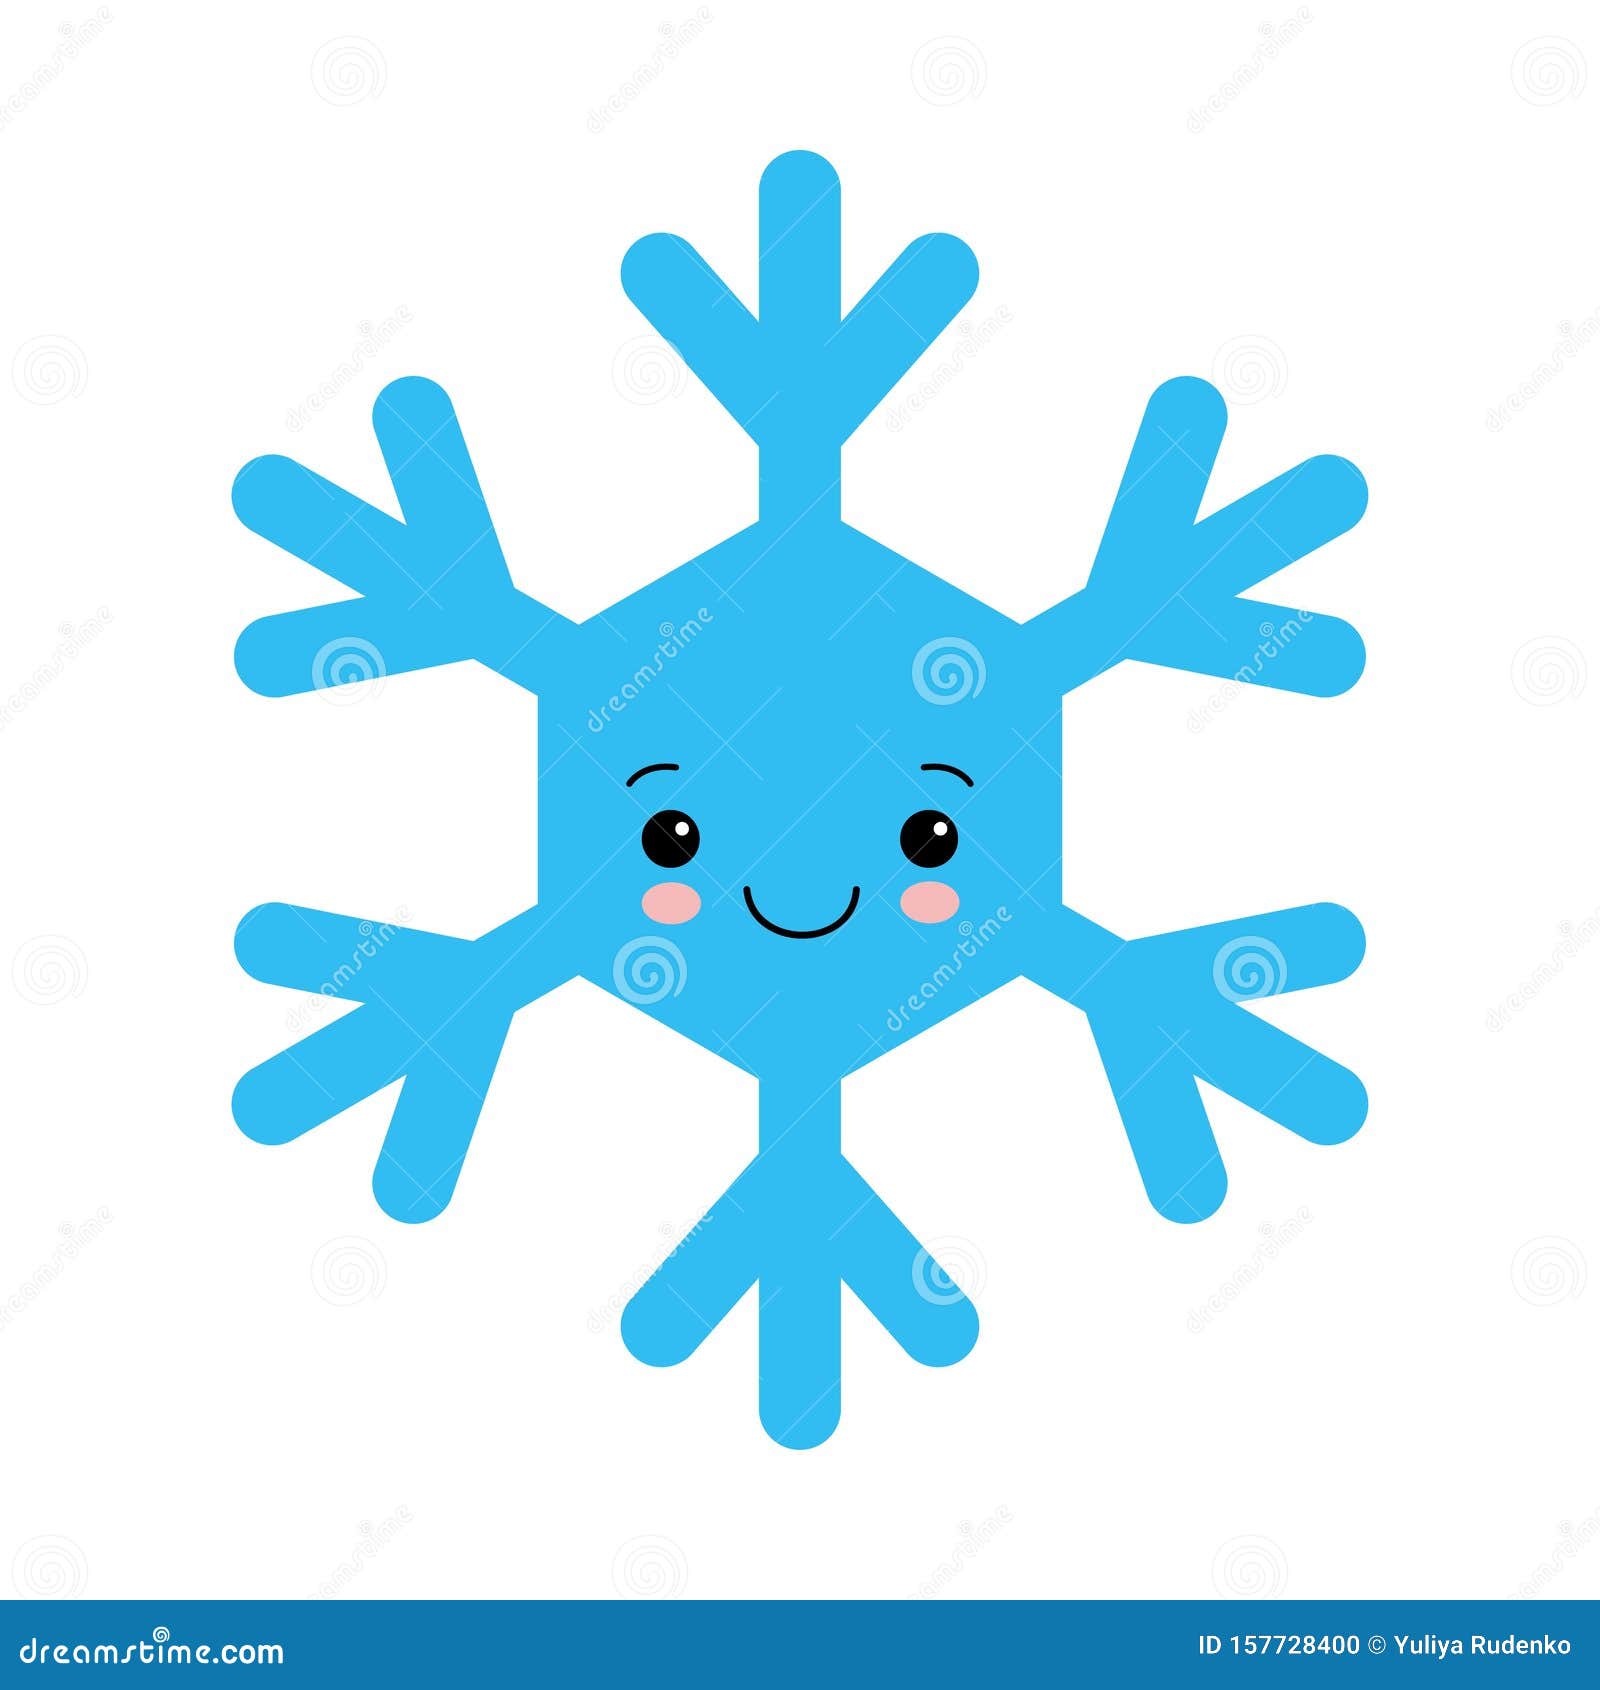 Cute Snowflake in Cartoon Style. Adorable Snow Flakes Smiley Characters.  Funny Christmas Doodles Stock Illustration - Illustration of funny,  ornament: 157728400